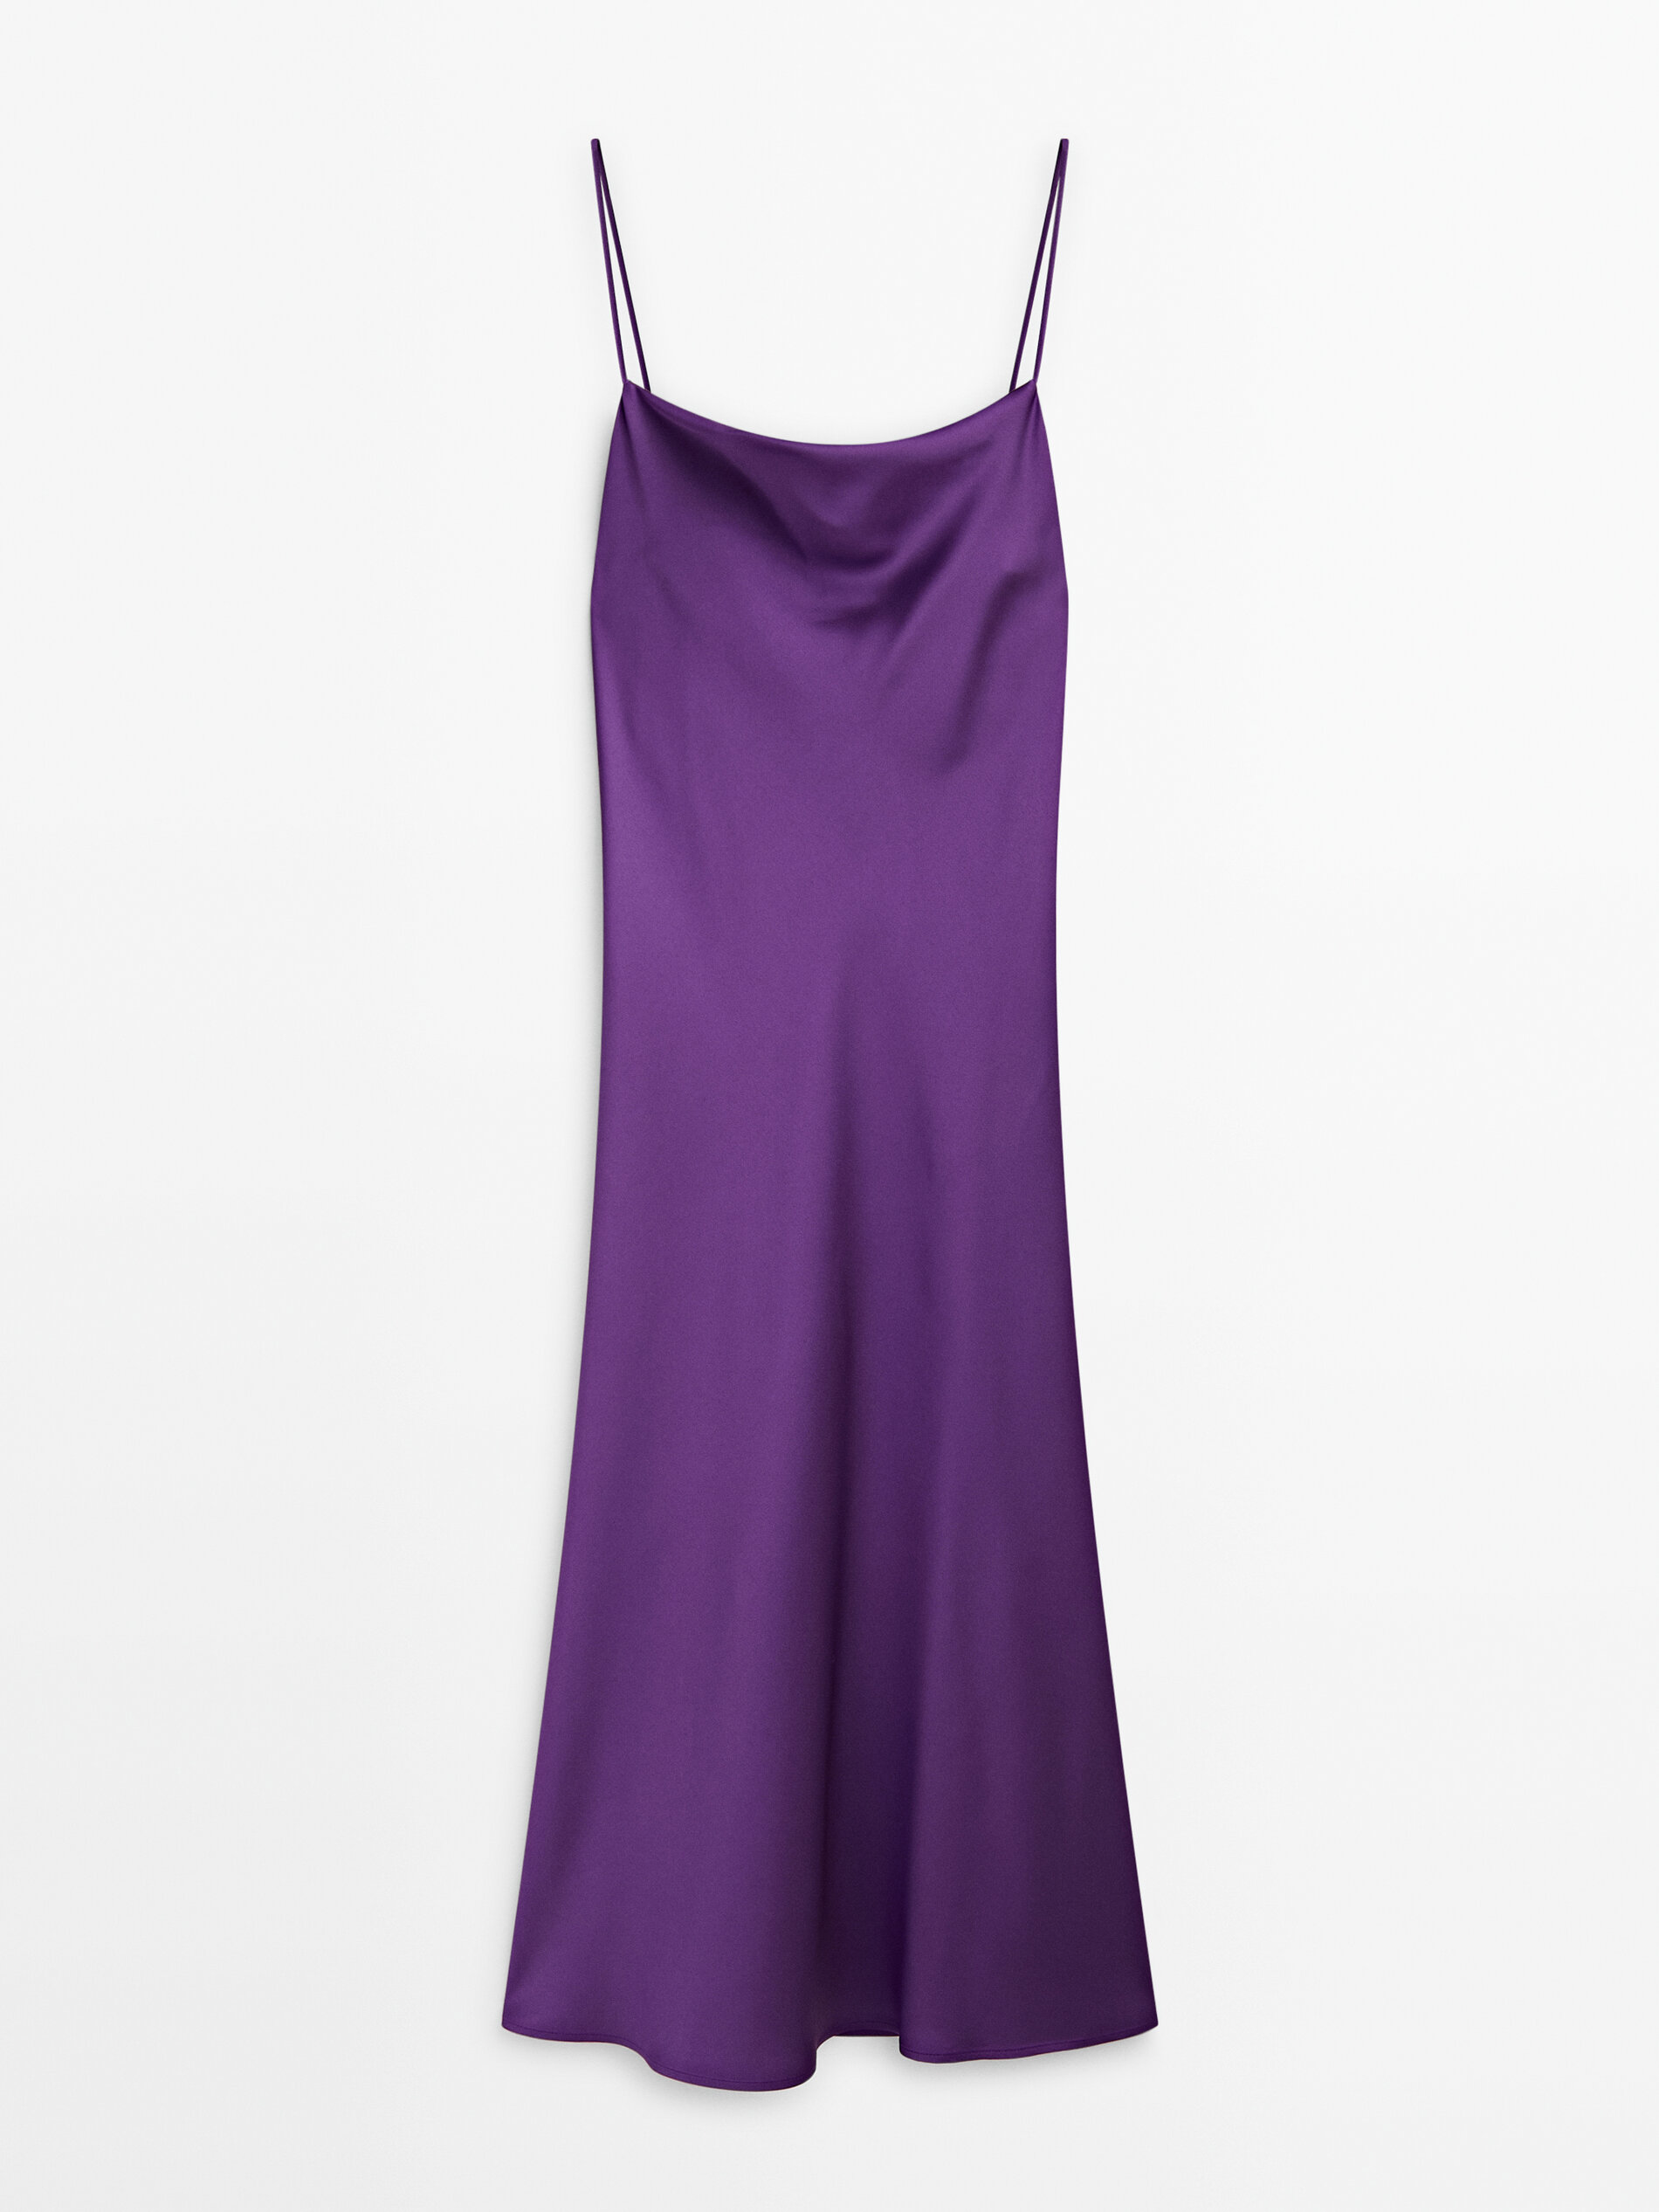 Satin camisole dress with back detail